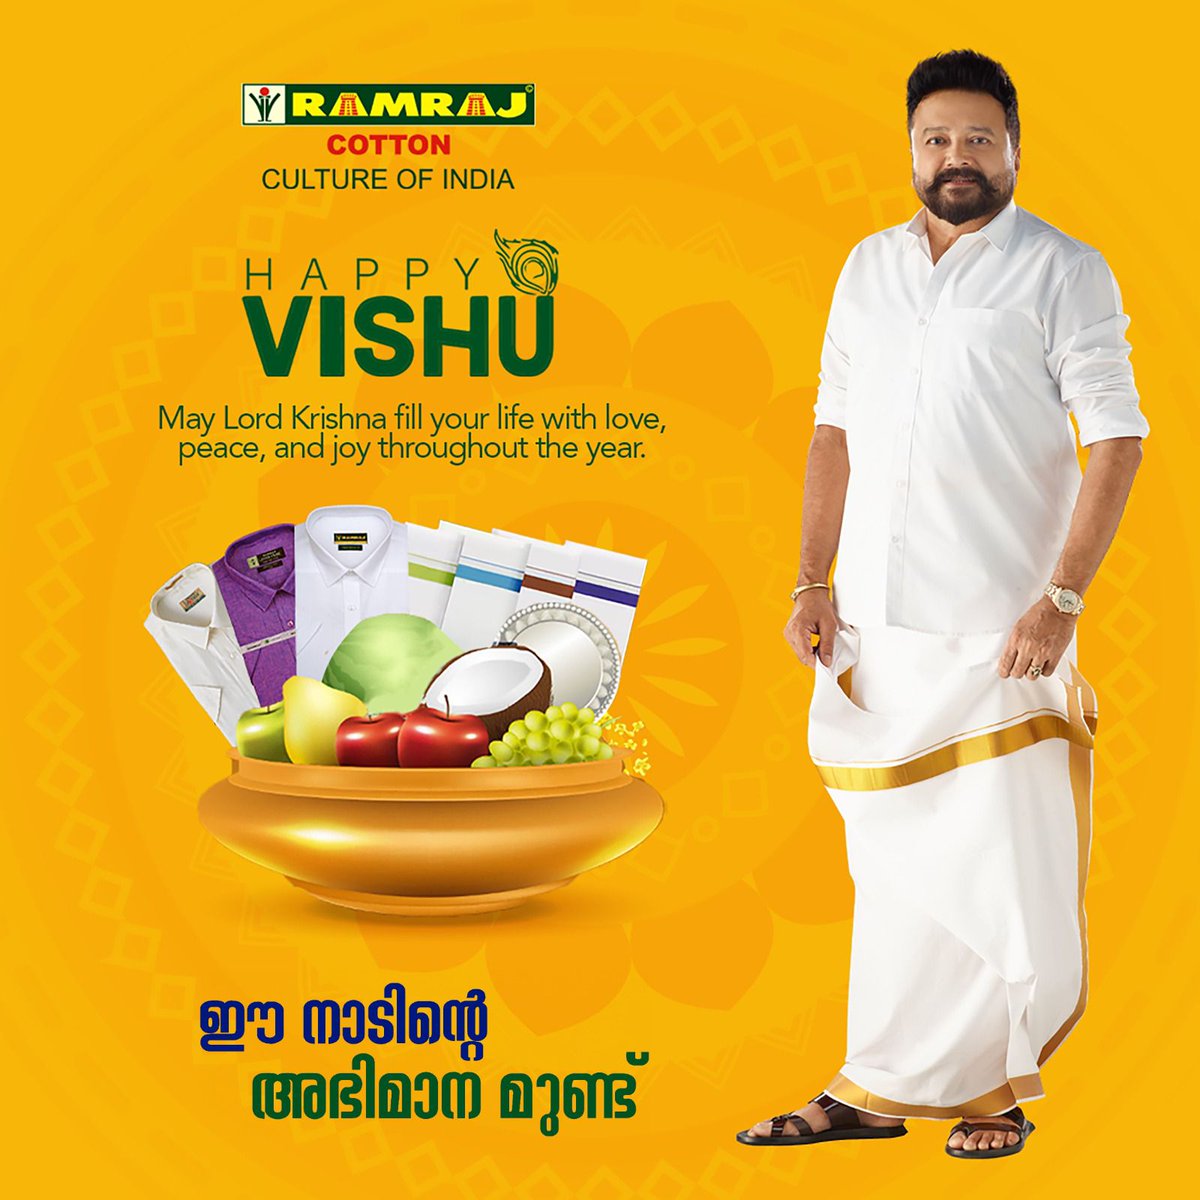 Wishing you and your loved ones a happy and prosperous Vishu! May this new year bring joy and abundance into your lives. #Vishu #NewBeginnings #NewYear #Celebrations #Ramraj